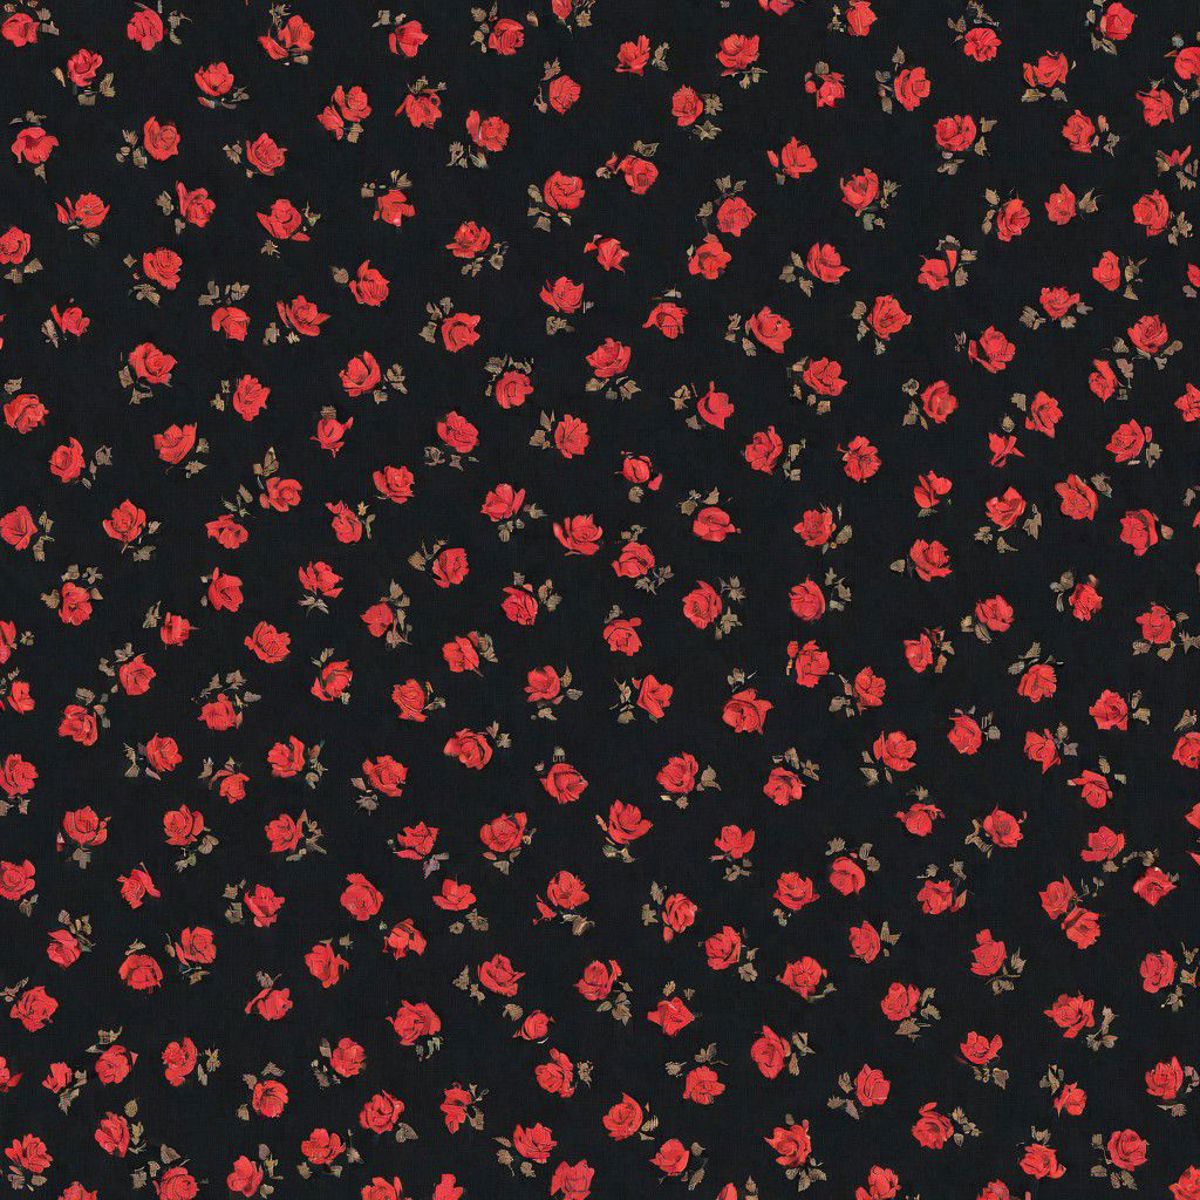 Ditsy Floral Pattern image by aussiedecalf